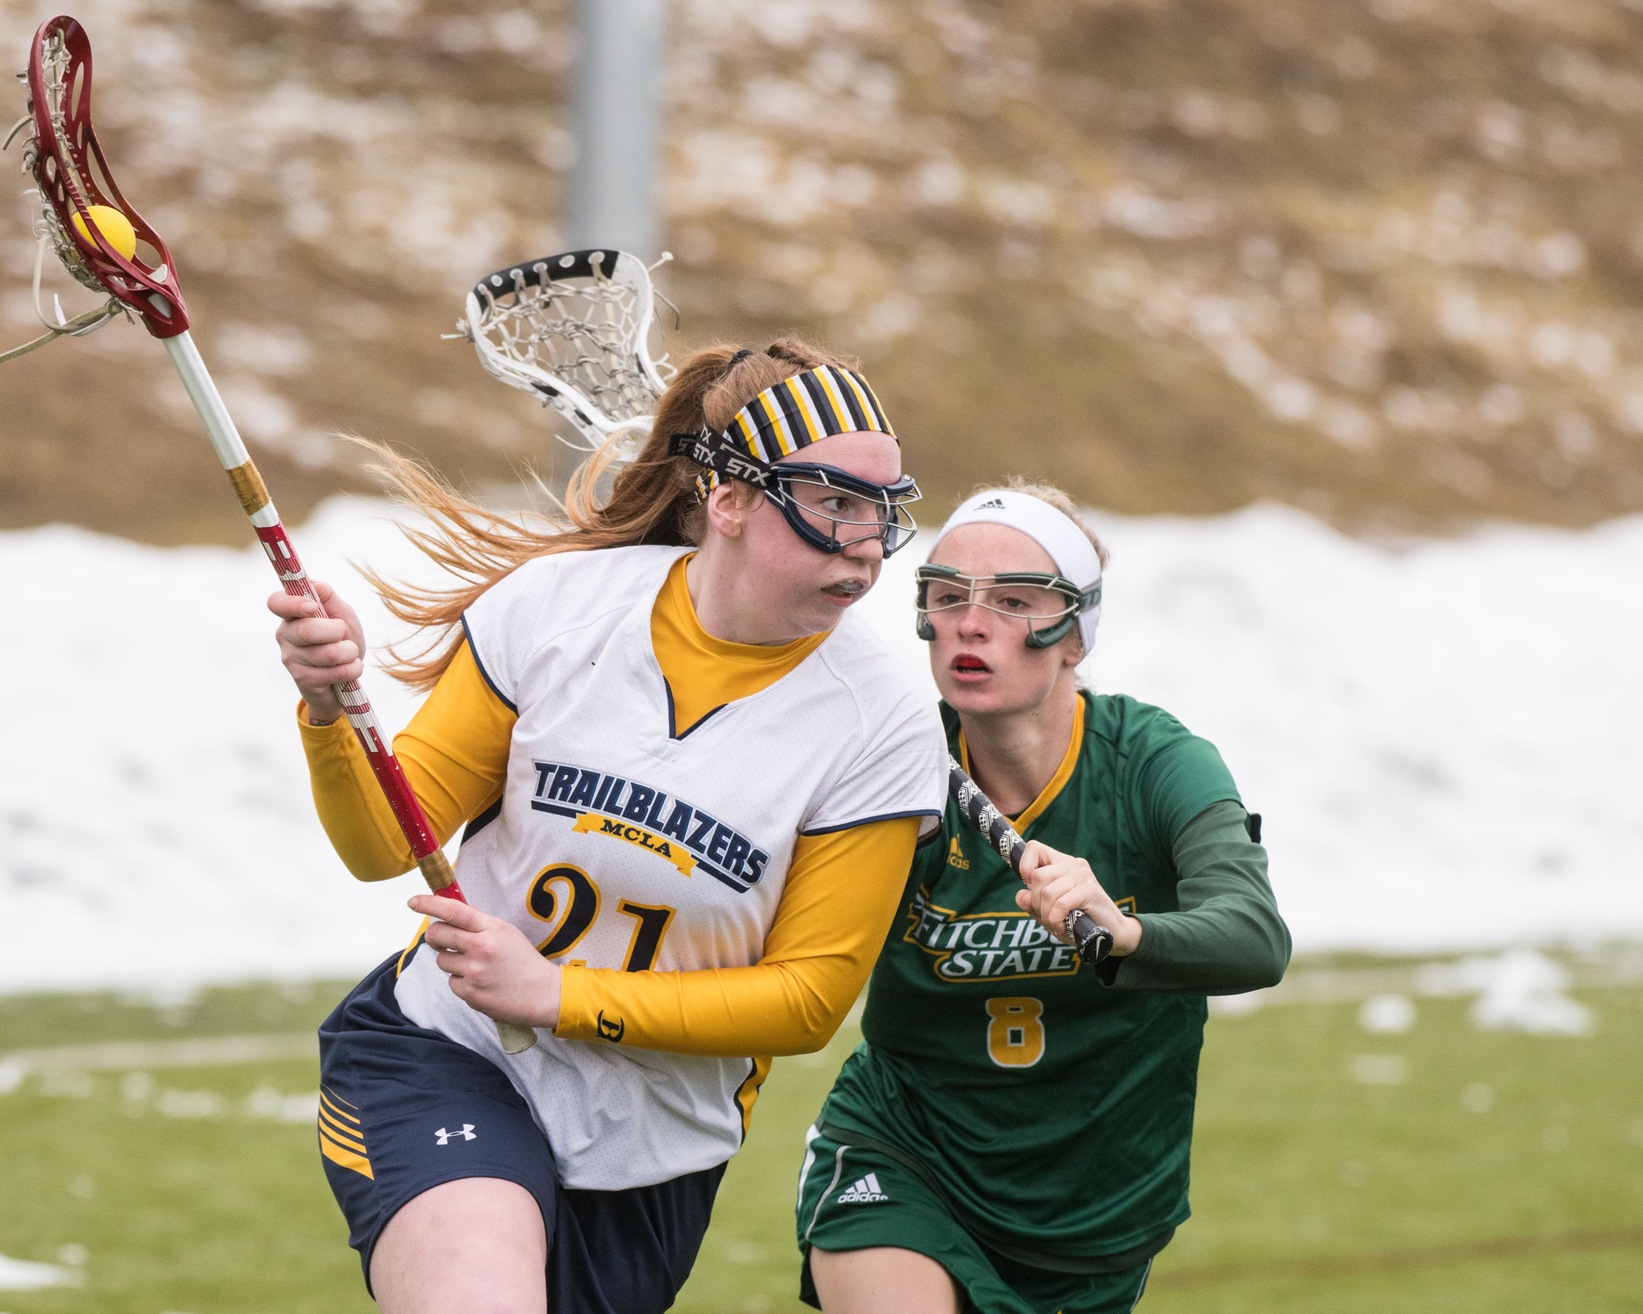 Granito, Dowling lead Lacrosse to first win as they defeat Bay Path 14-8